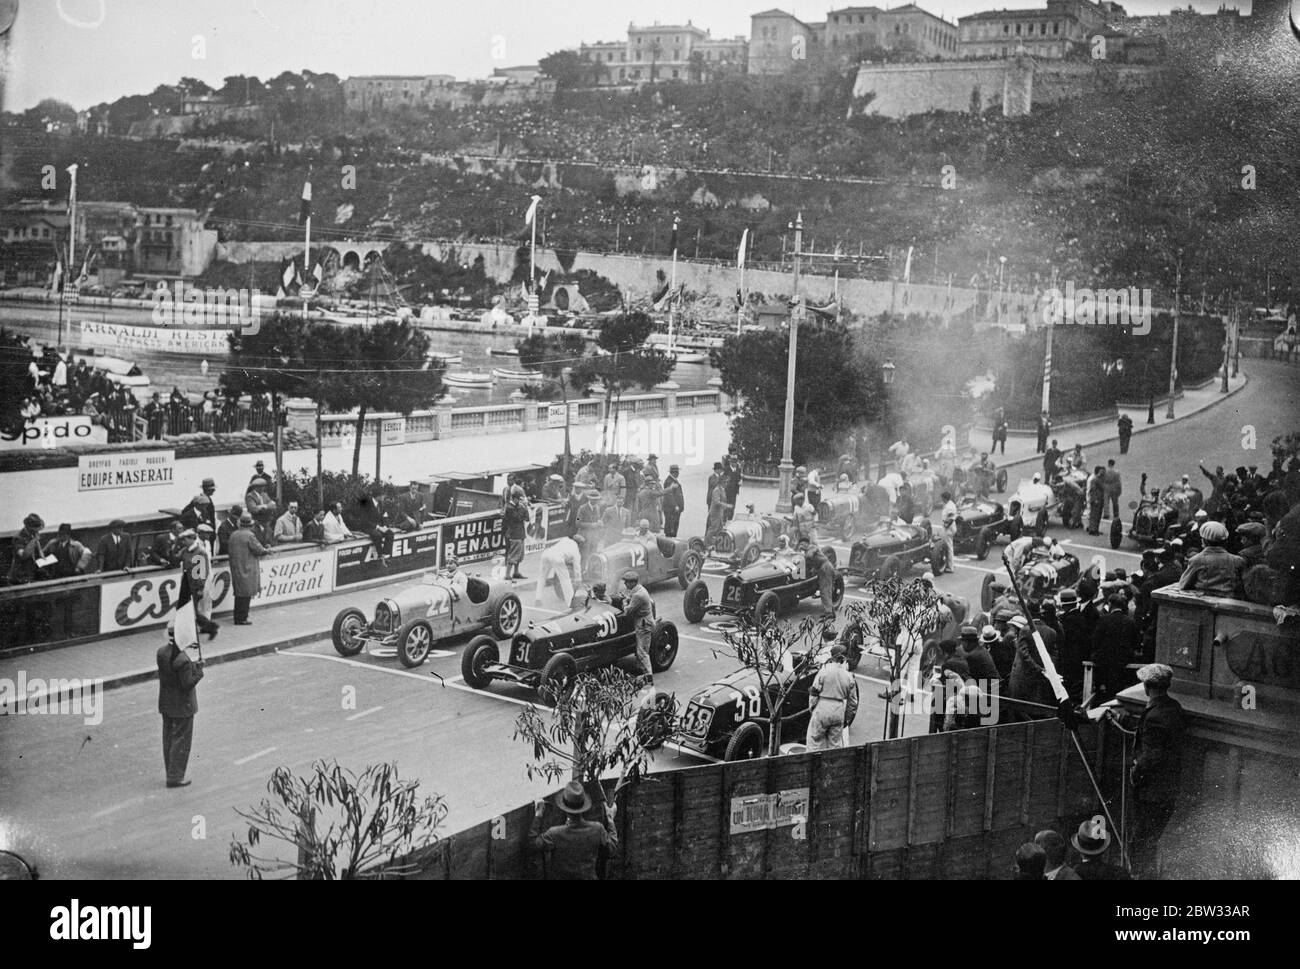 Race for Grand Prix , De Monaco race won by Italian driver . The grand prix de Monaco , motor race which is run through the streets of the town was won by the Italian driver Nuvilari . The start of the race at Monaco . 19 April 1932 . Stock Photo